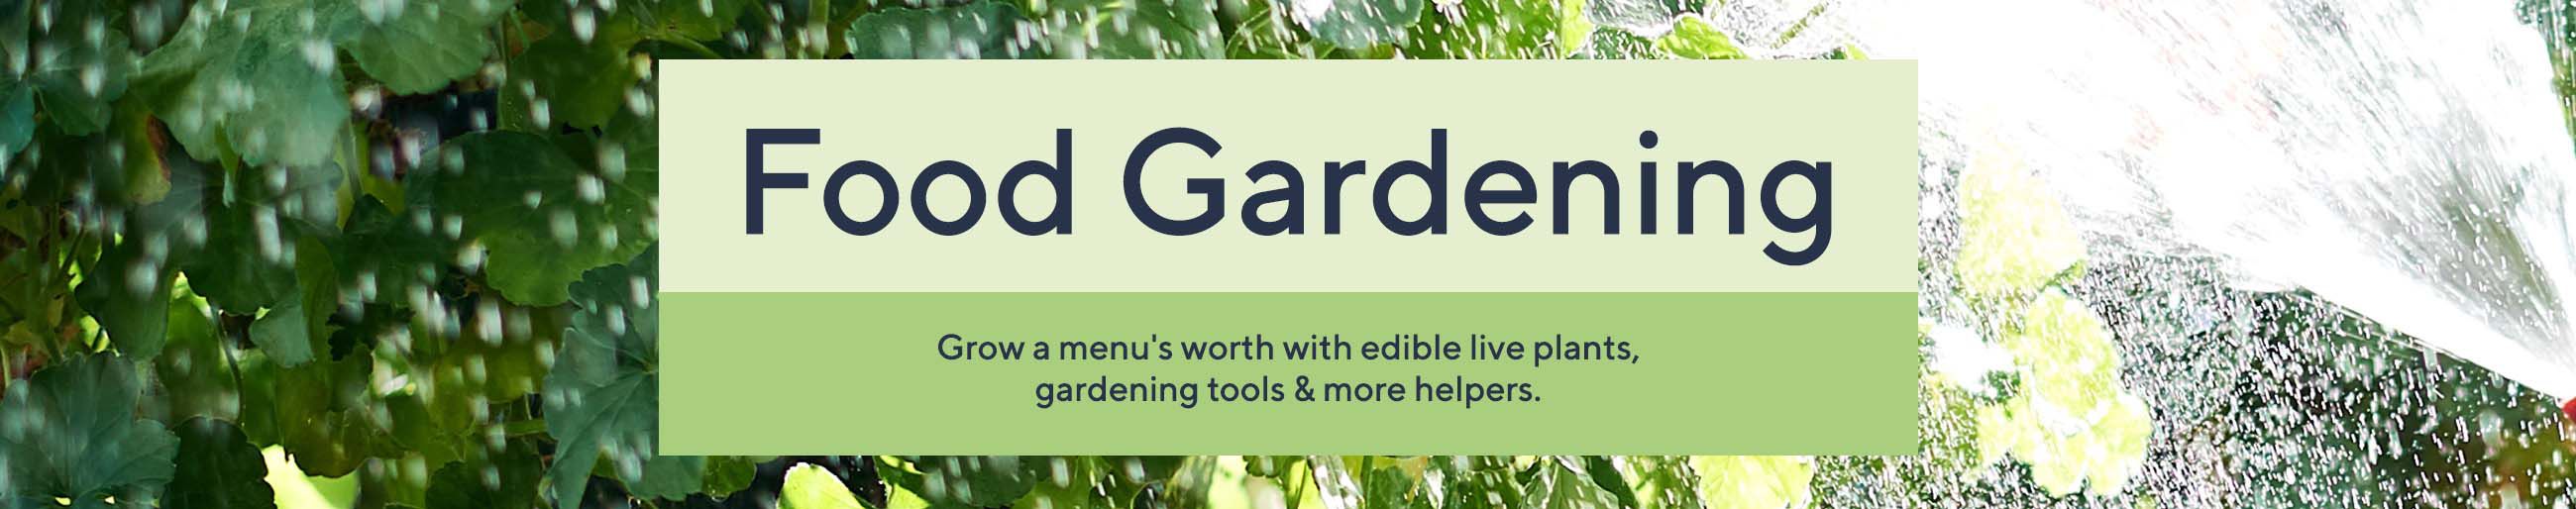 Food Gardening  - Grow a menu's worth with edible live plants, gardening tools & more helpers. 